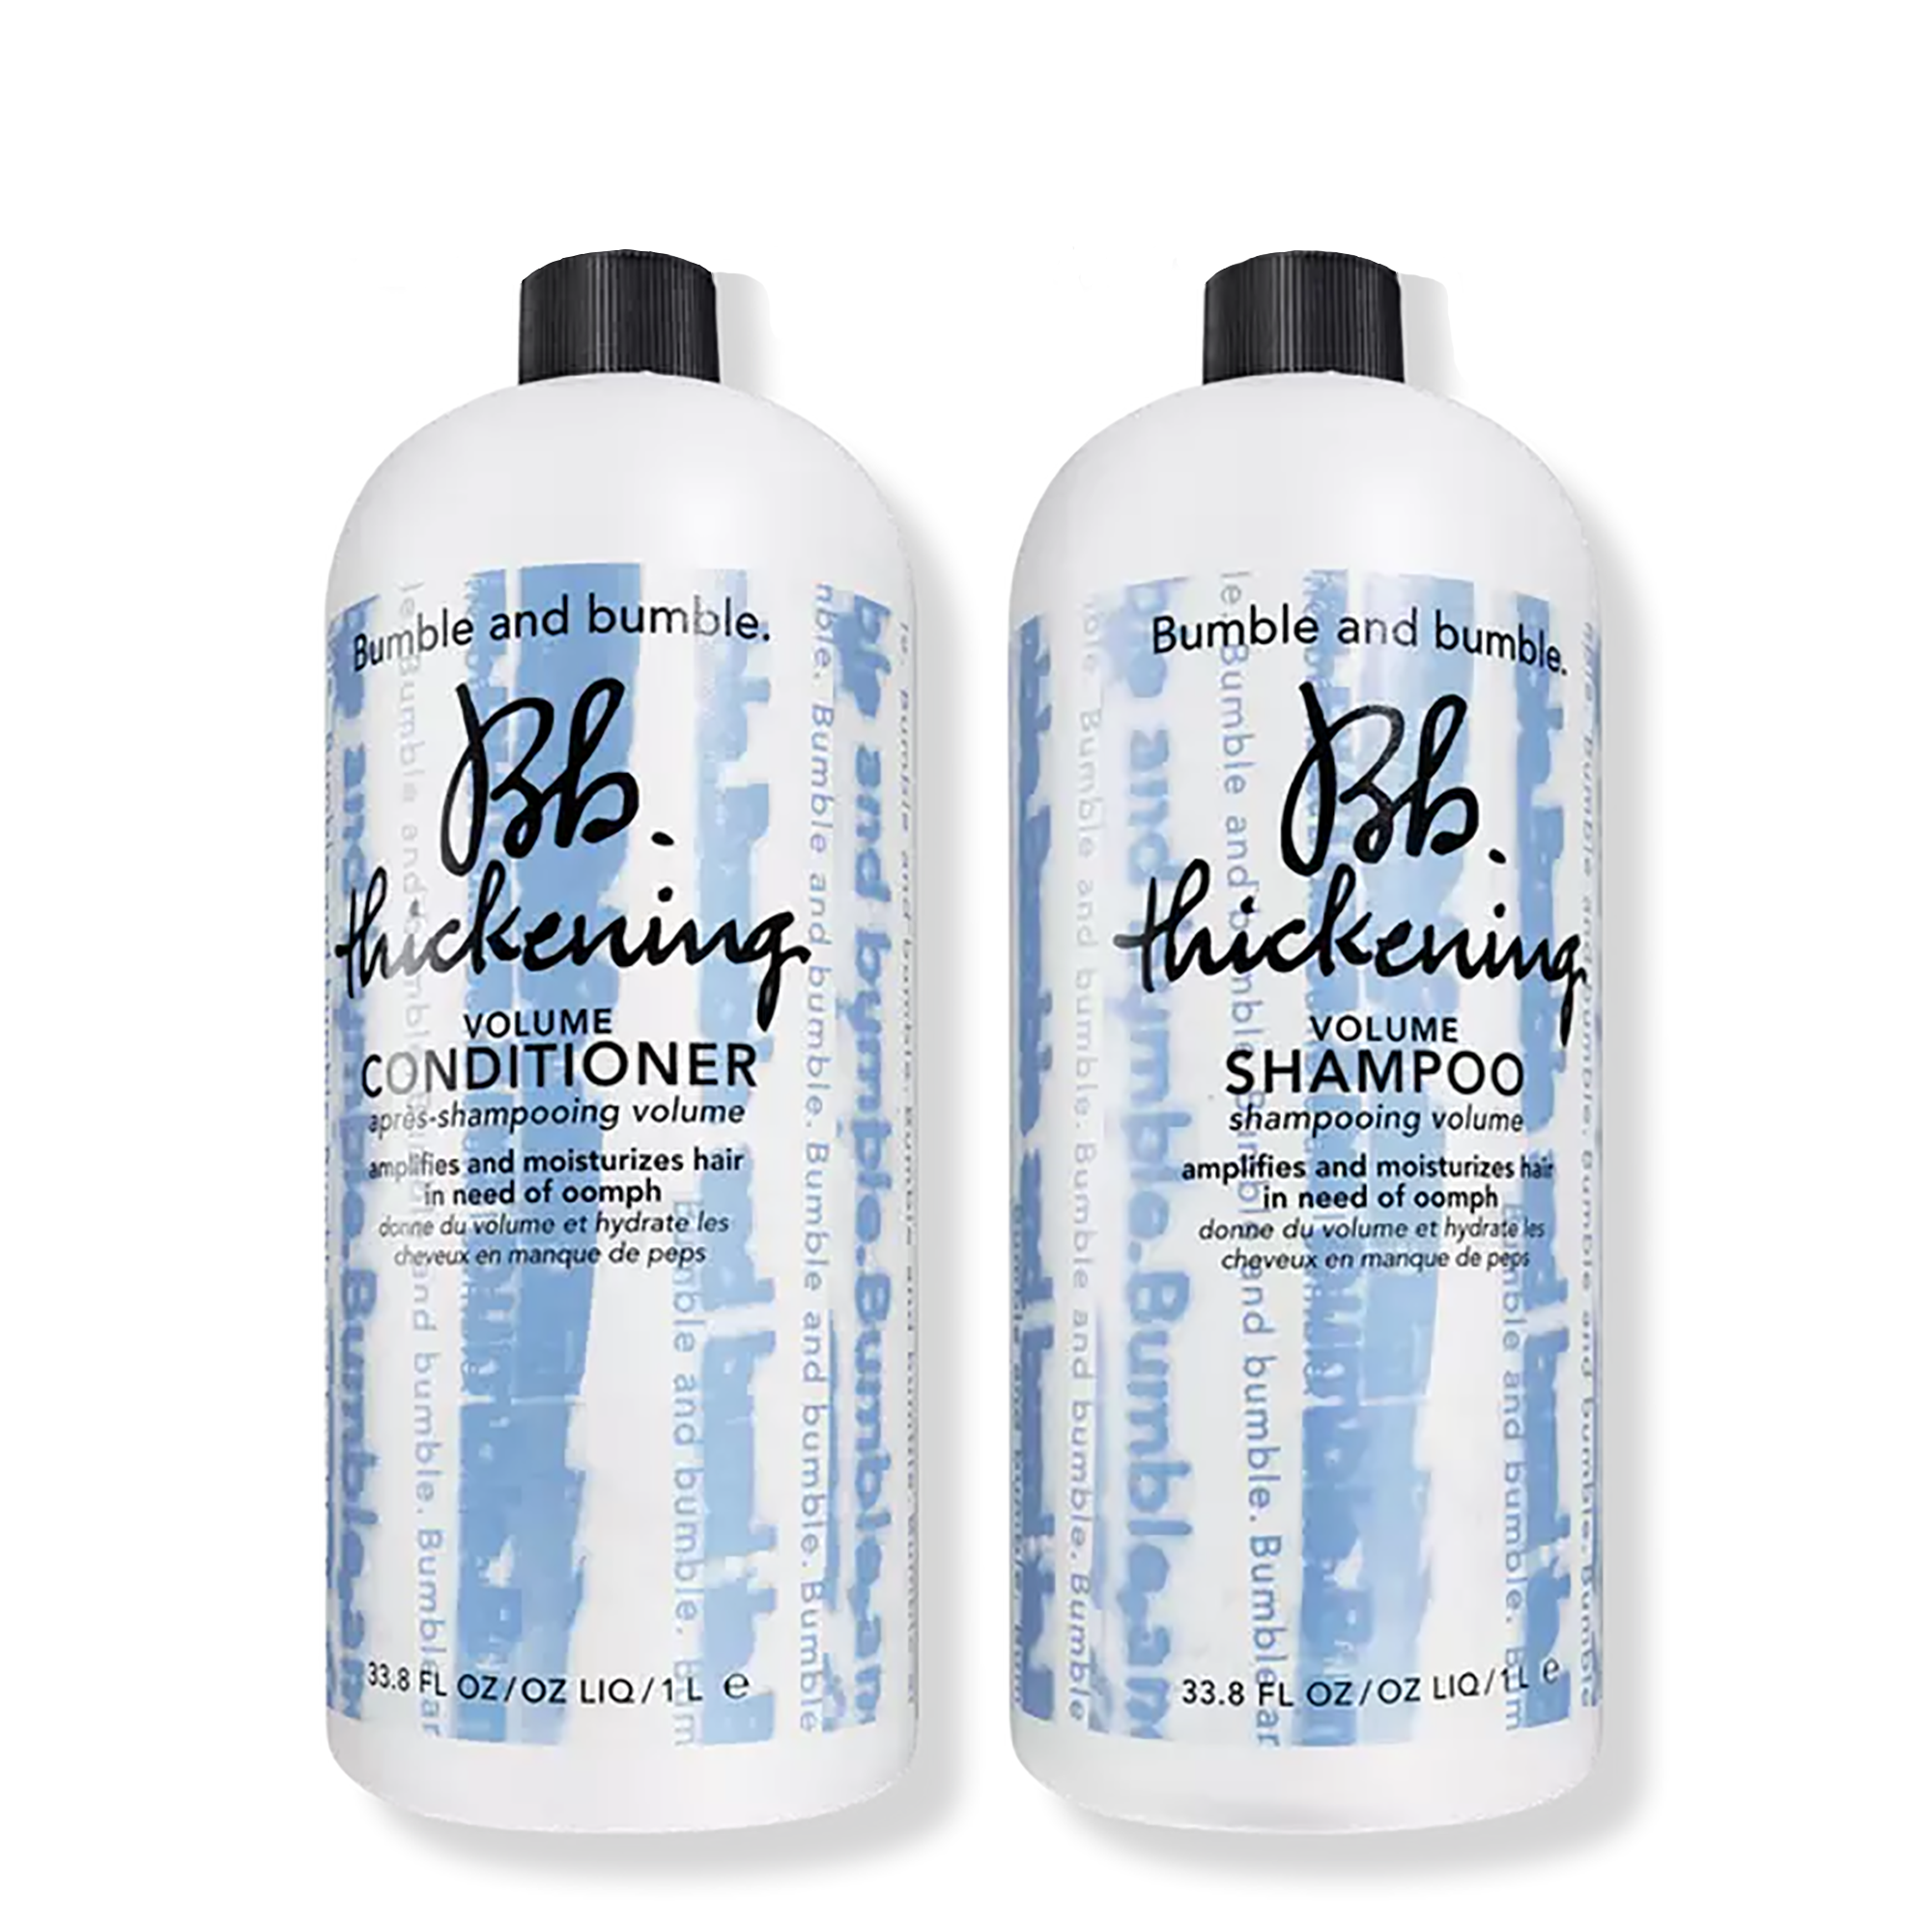 Bumble and Bumble Thickening Shampoo and Conditioner Liter Duo ($216 Value) / LITER